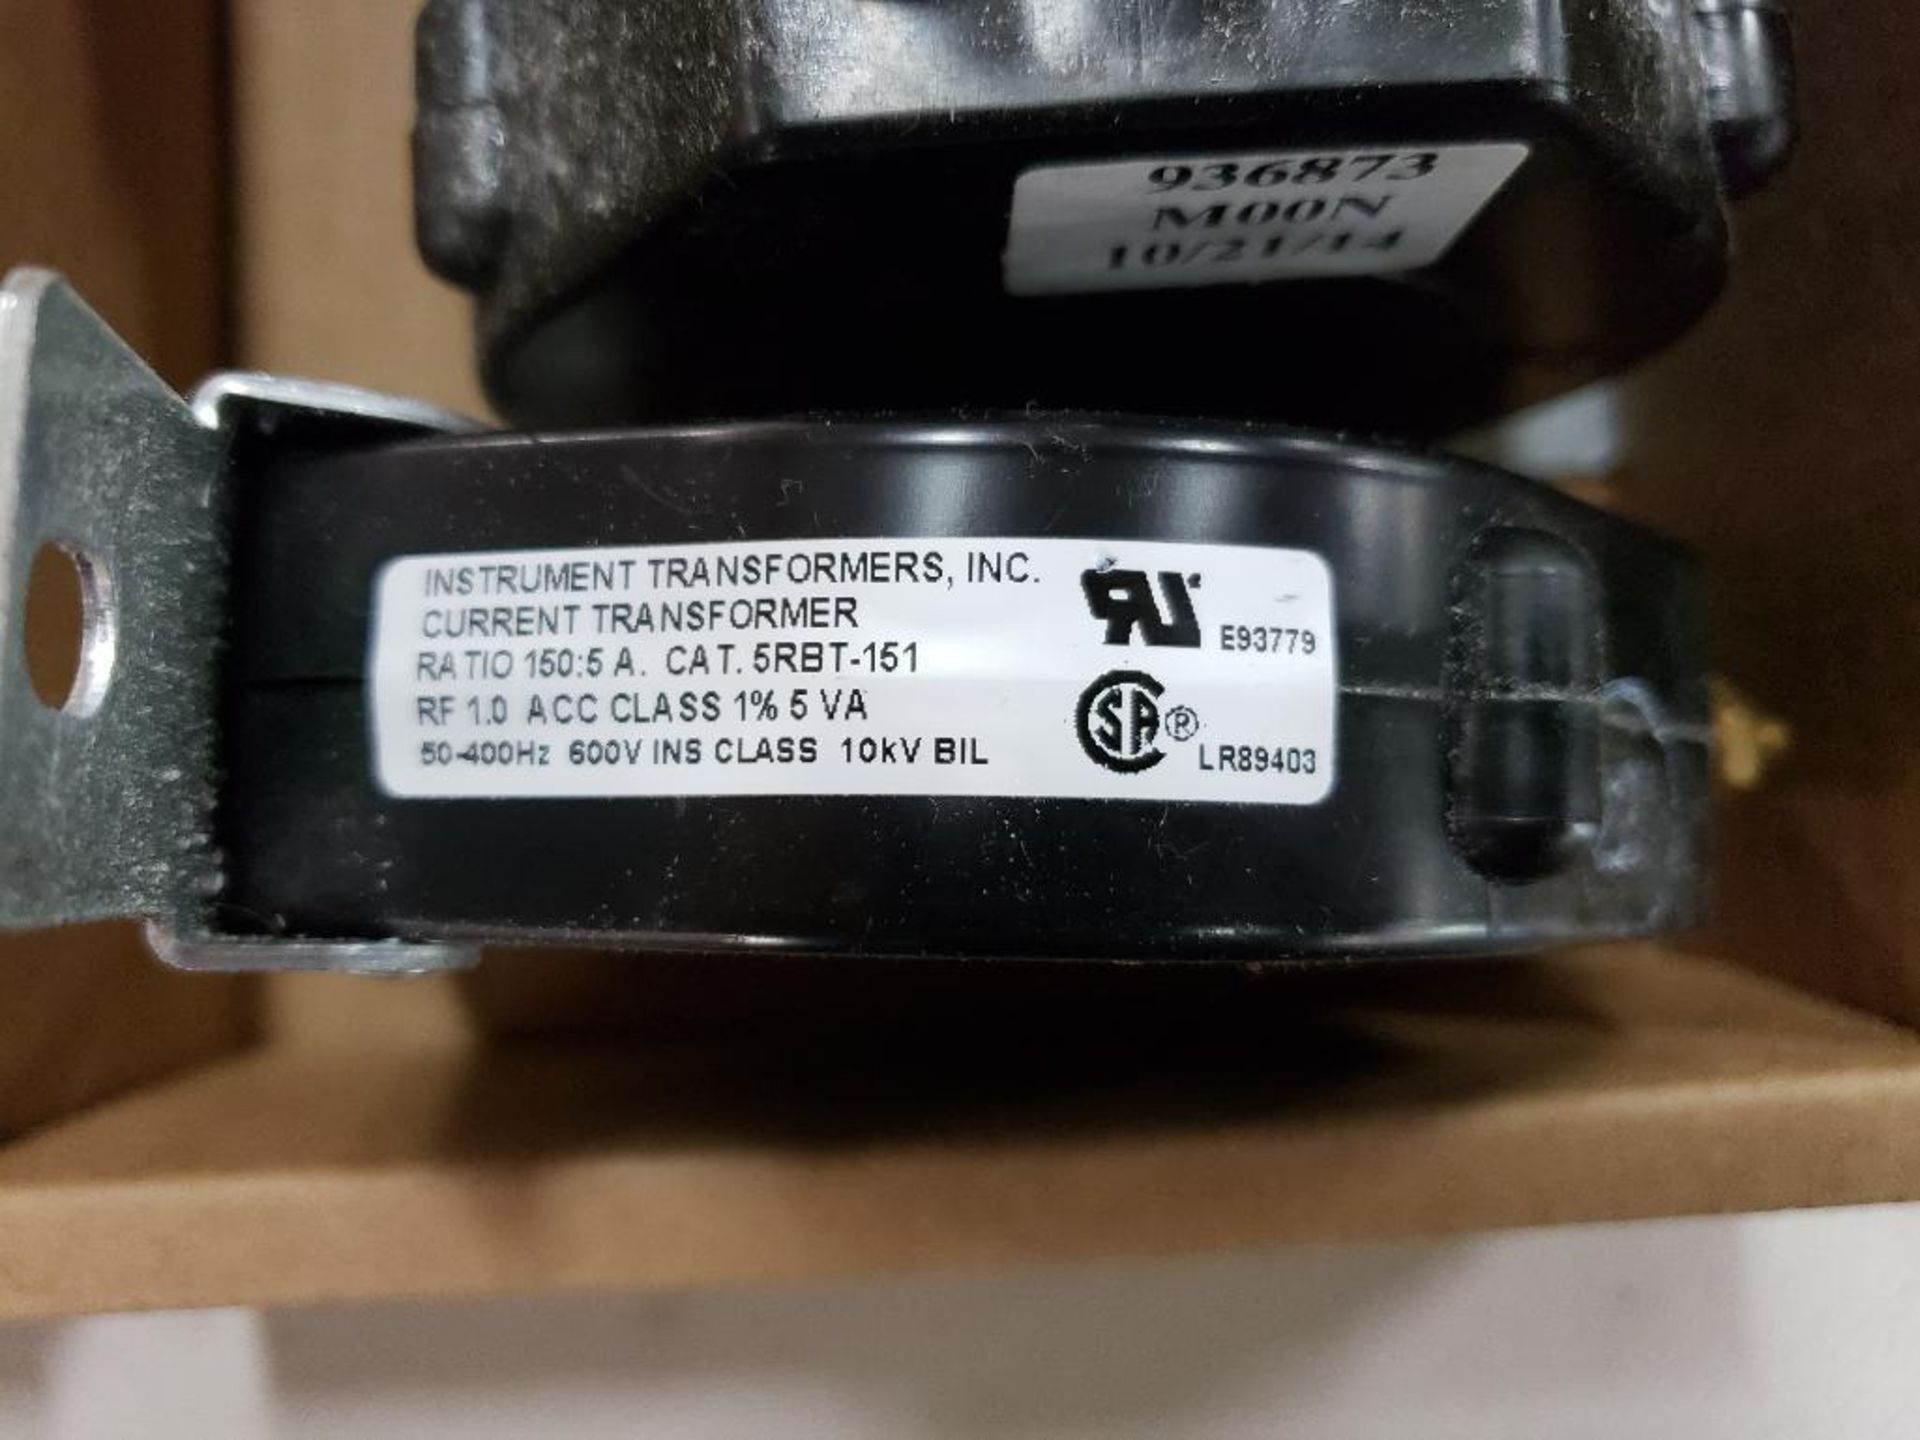 Qty 8 - Instrument Transformers Inc Current Transformer. Catalog 5RBT-151. New as pictured. - Image 3 of 3